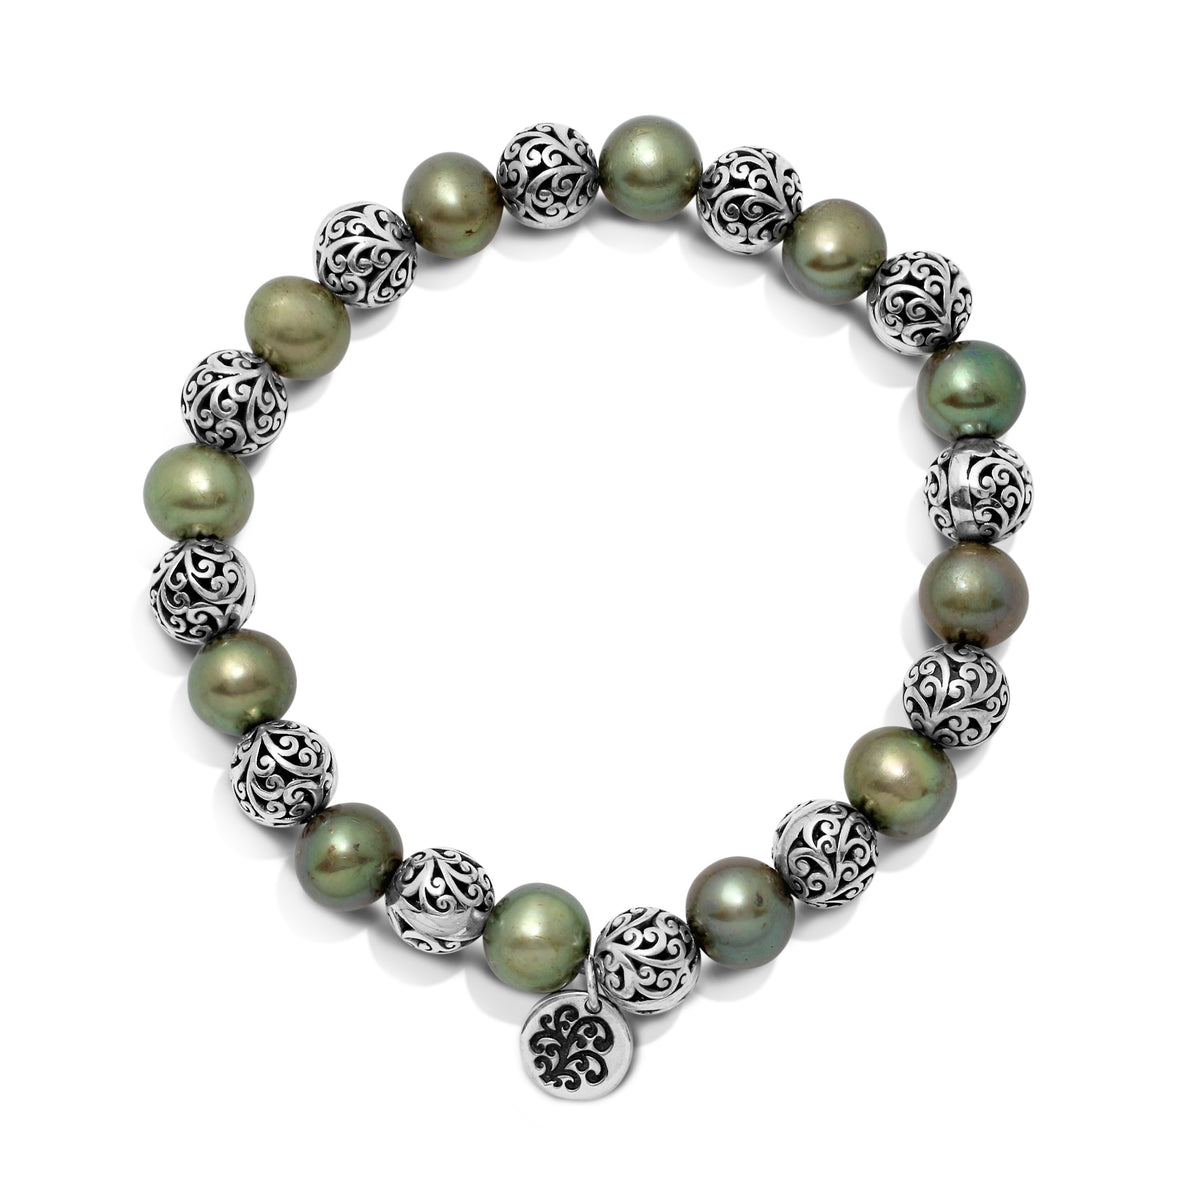 Green Pearl (8mm) Beads with LH Scroll Bead Every-Other Alternate Stretch Bracelet